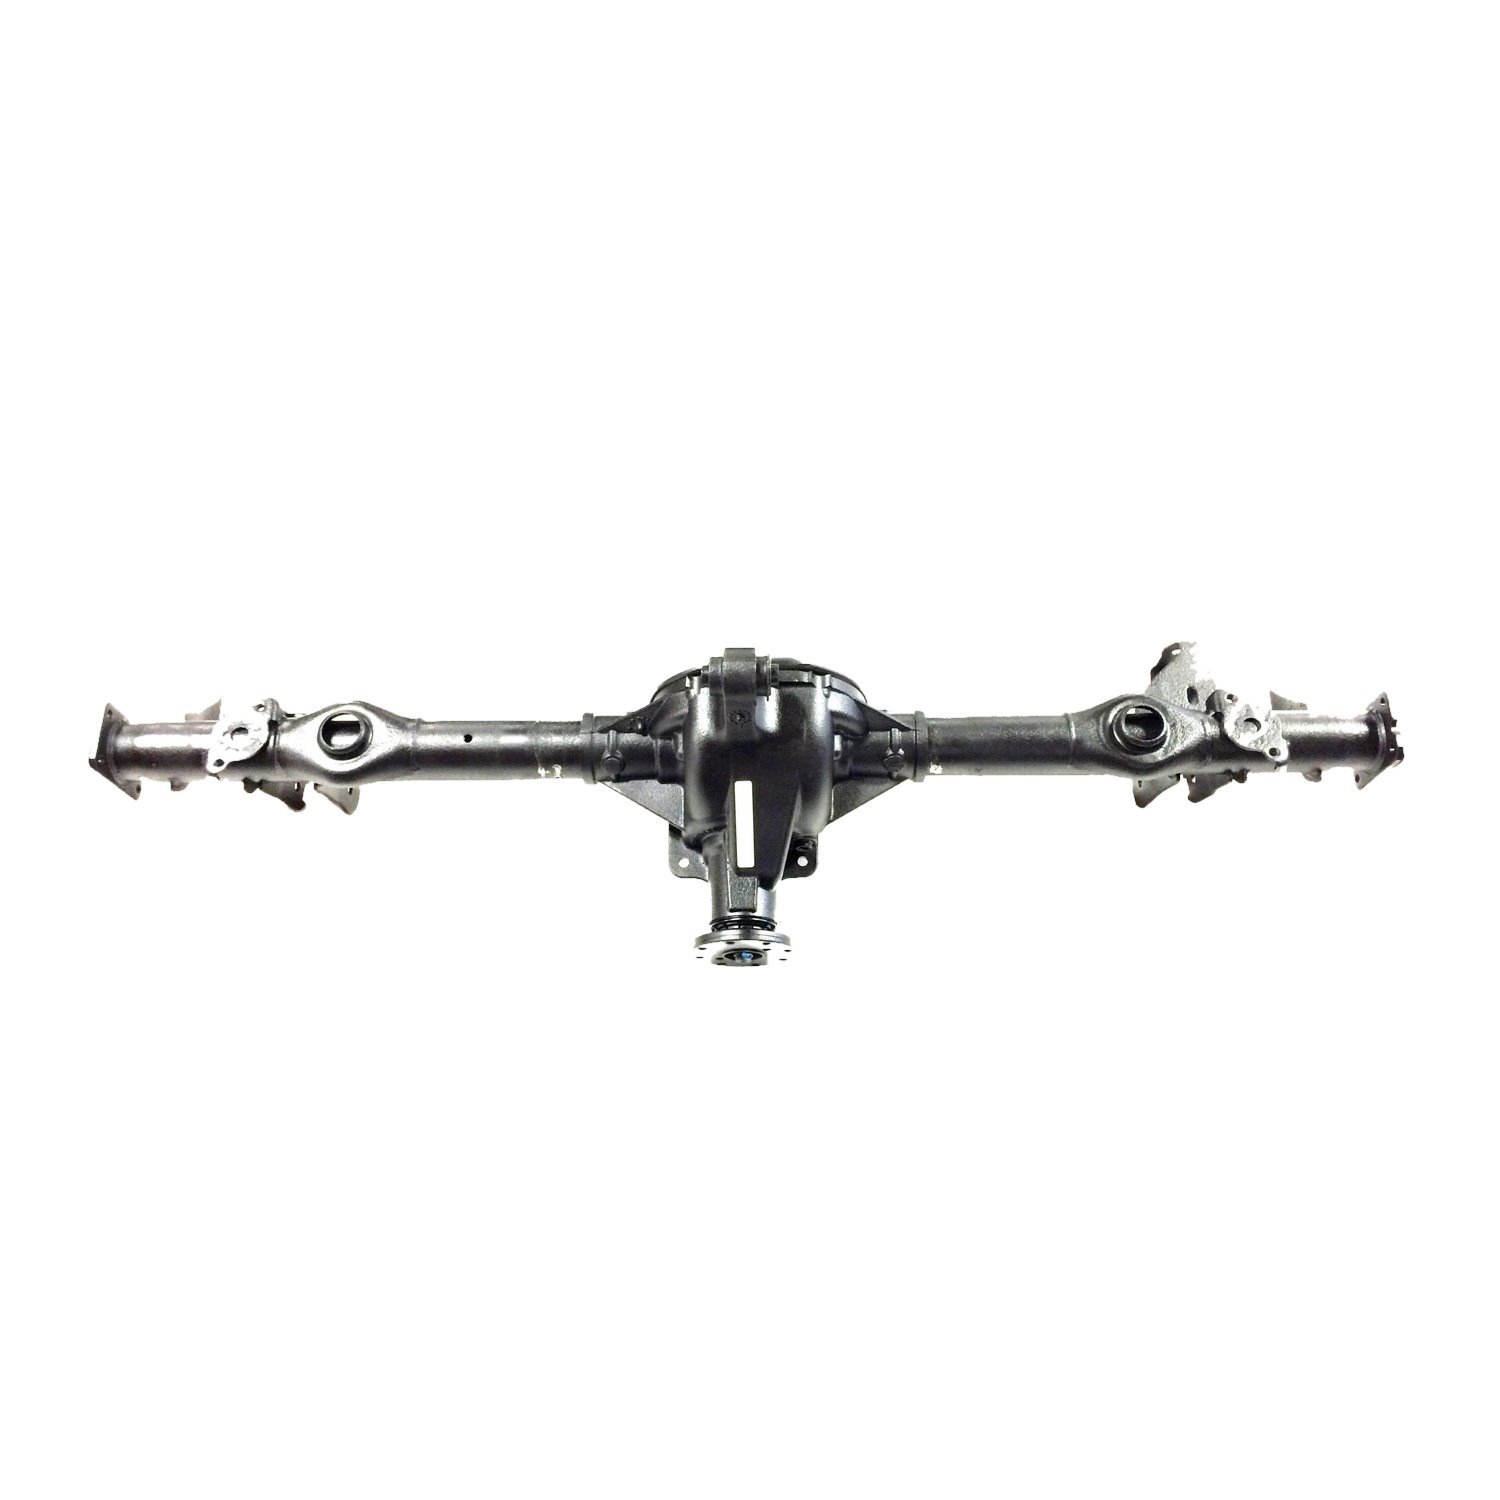 Reman 226mm IRS Axle Assembly, 2010-14 Dodge Challenger, 3.06 Ratio With Limited Slip